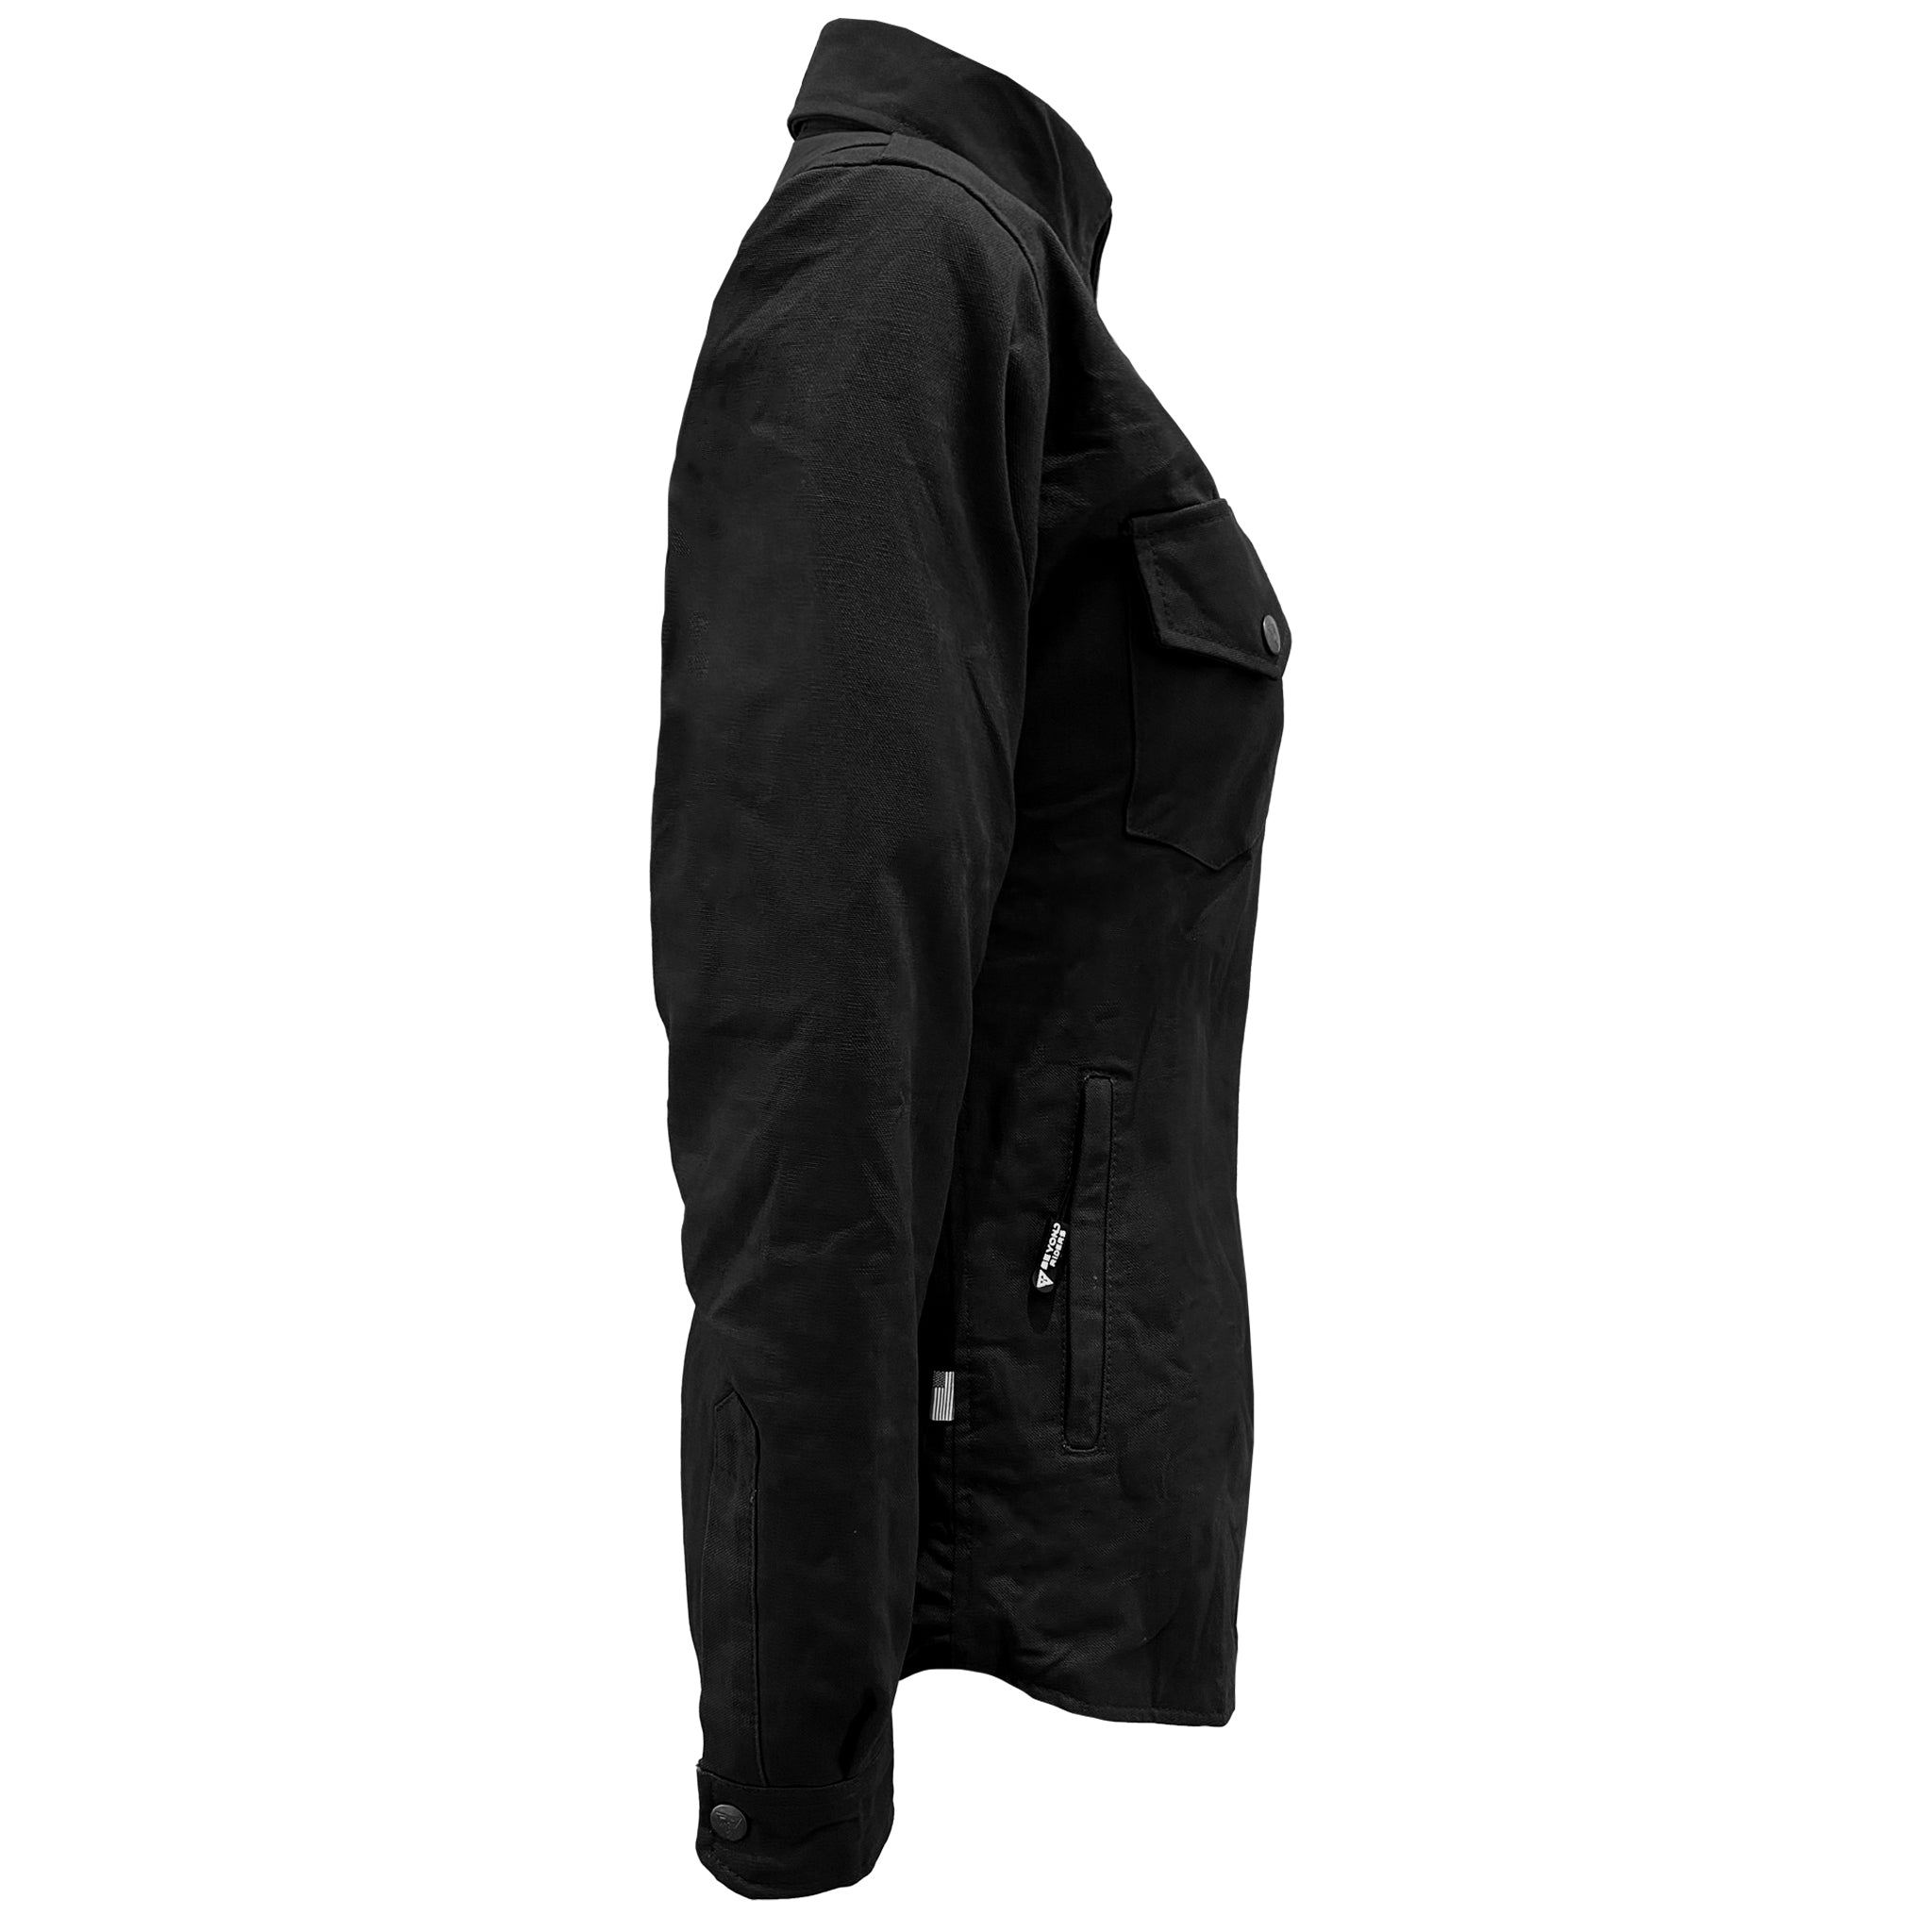 Protective Canvas Jacket for Women - Black with Pads